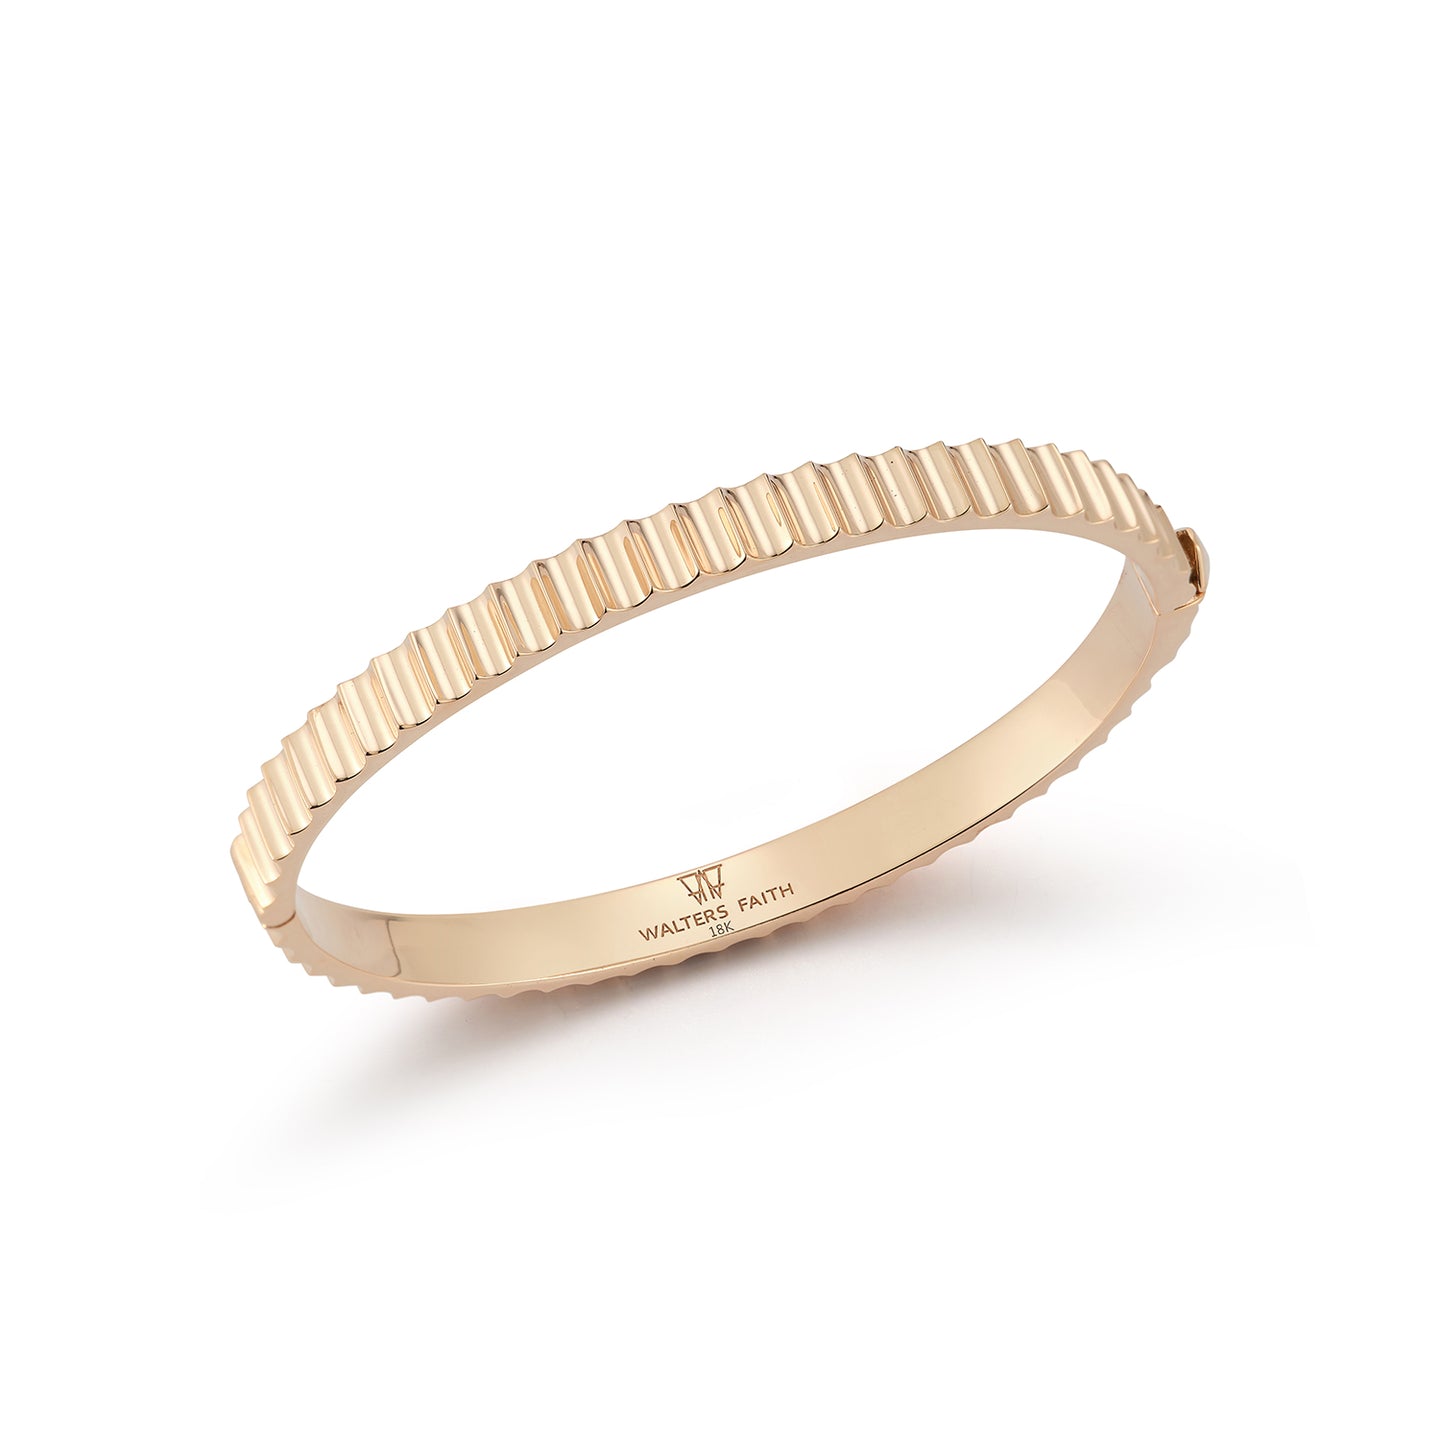 CLIVE 18K GOLD FLUTED BANGLE BRACELET WITH ORIGAMI PUSH CLOSURE